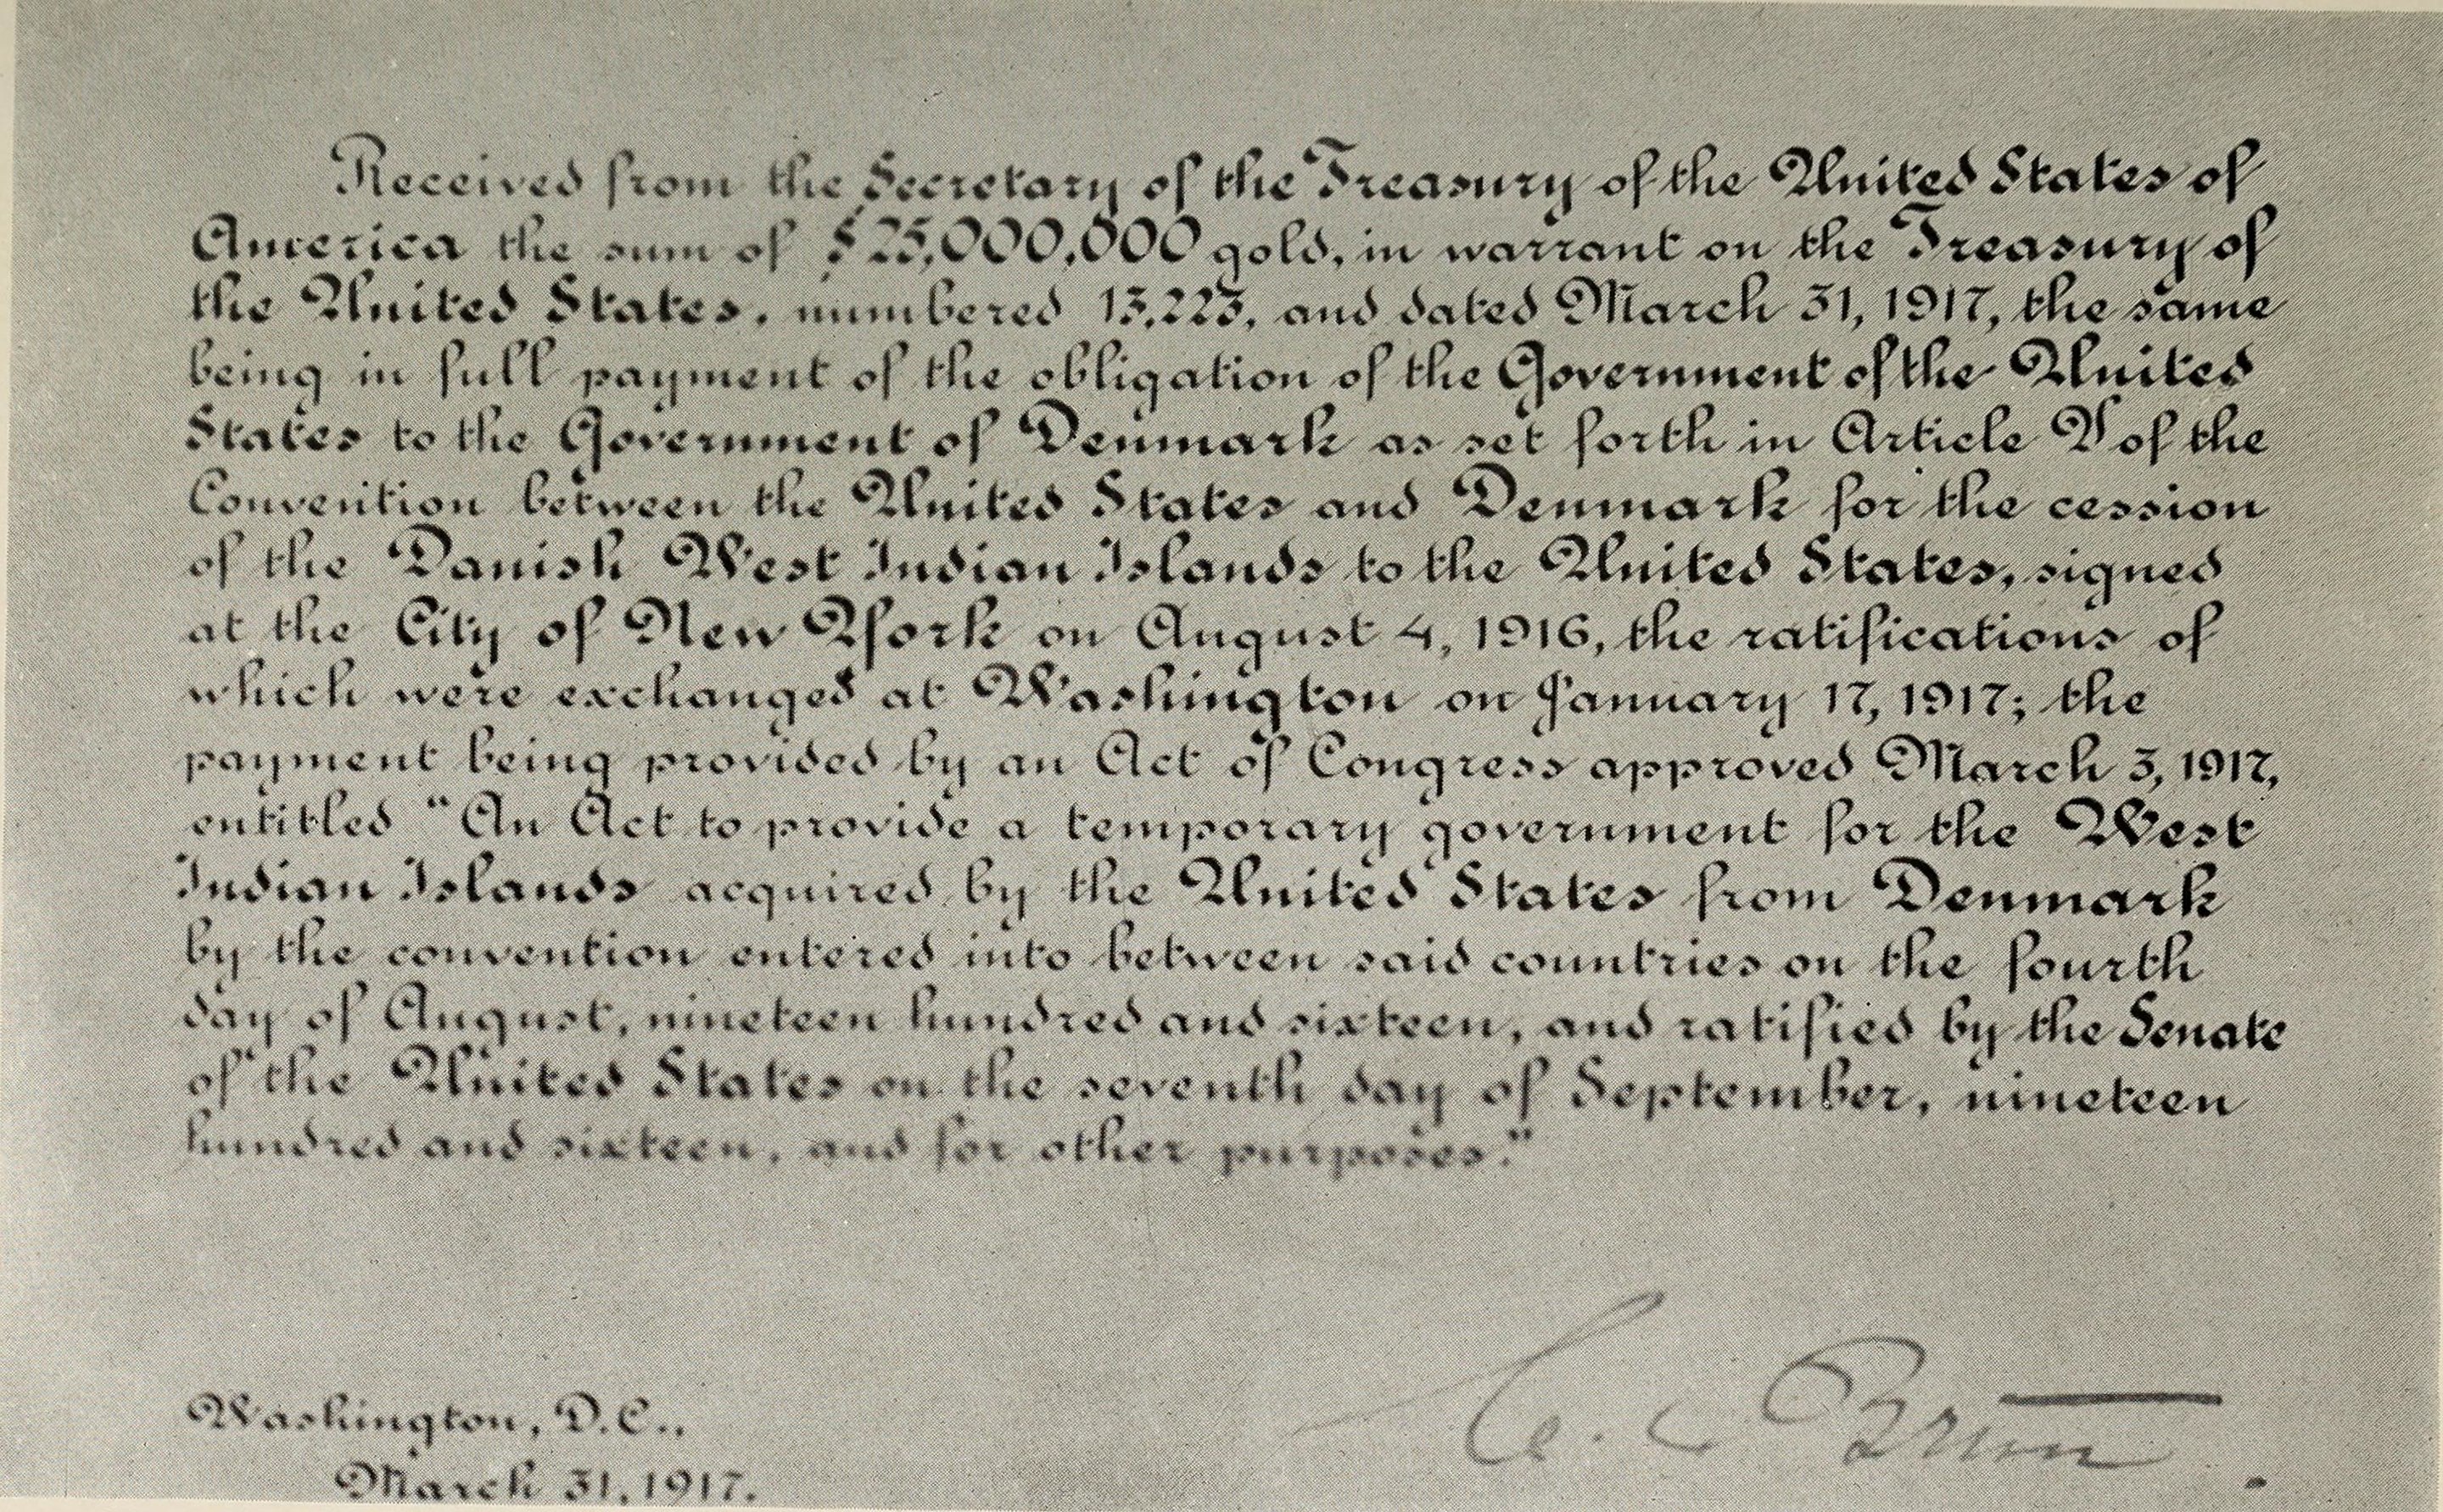 Sale of the Islands to the United States (photo credit: Pasquines)